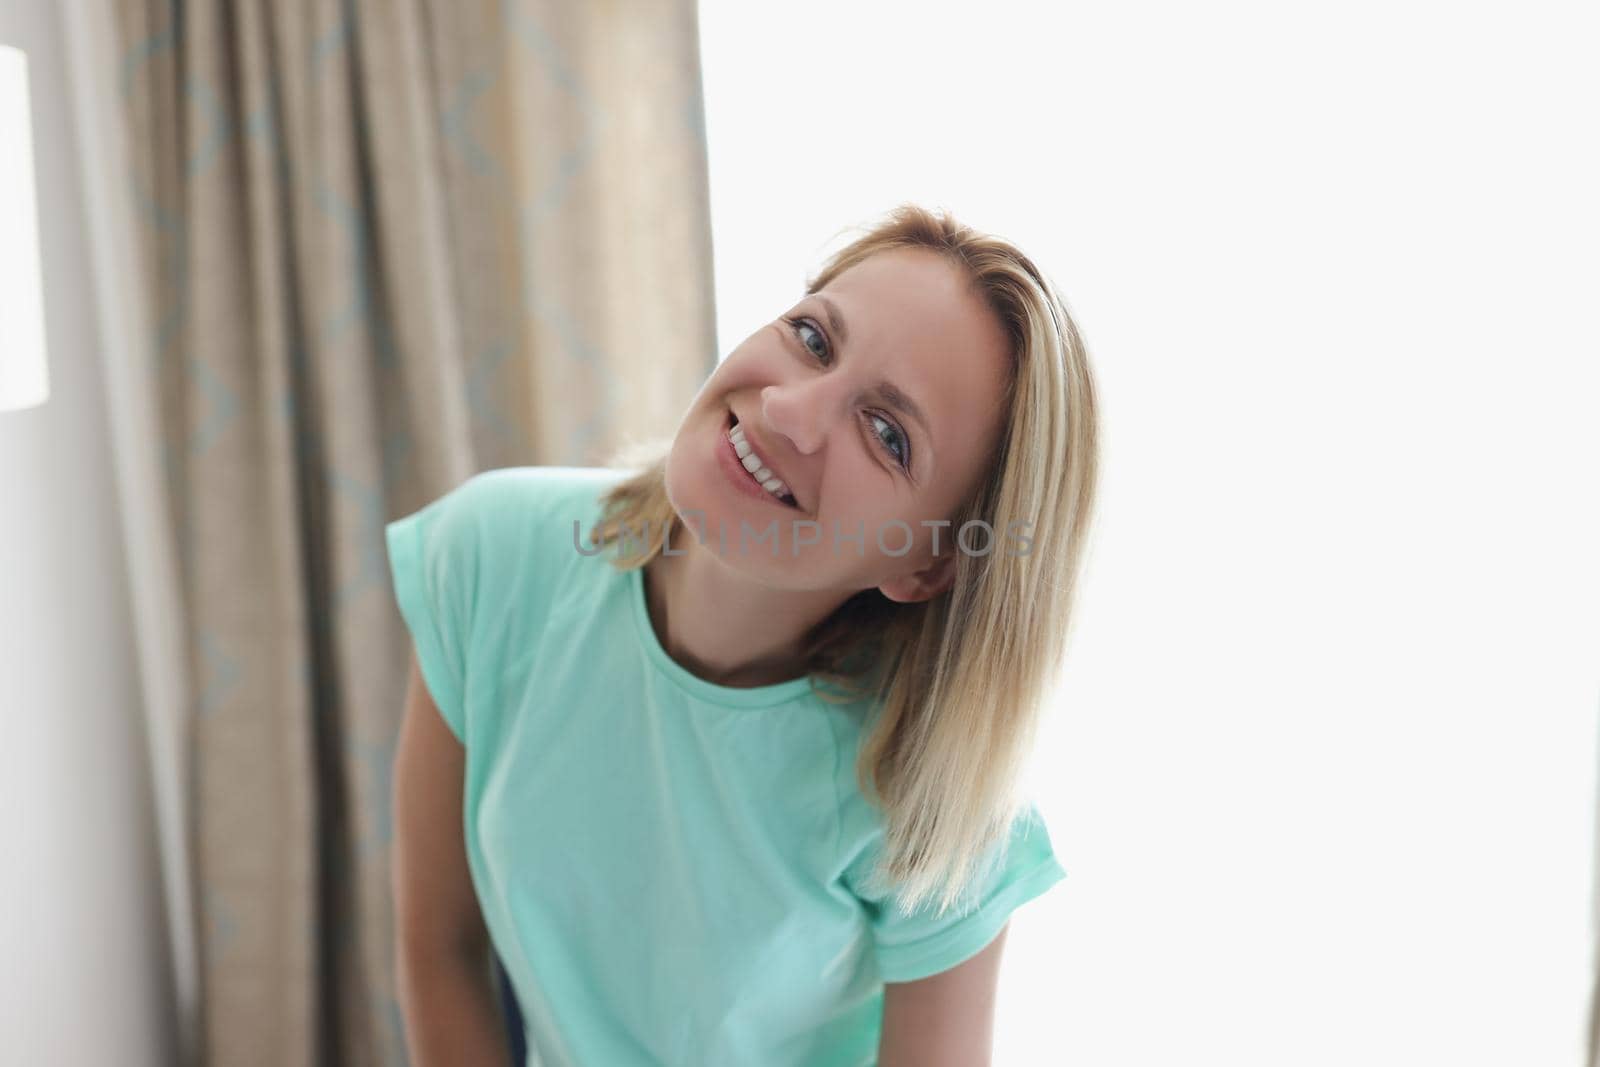 Portrait of happy smiling blonde young woman in apartment posing on curtain. Cheerful full of joy female at home. Modeling, relaxation, housewife concept